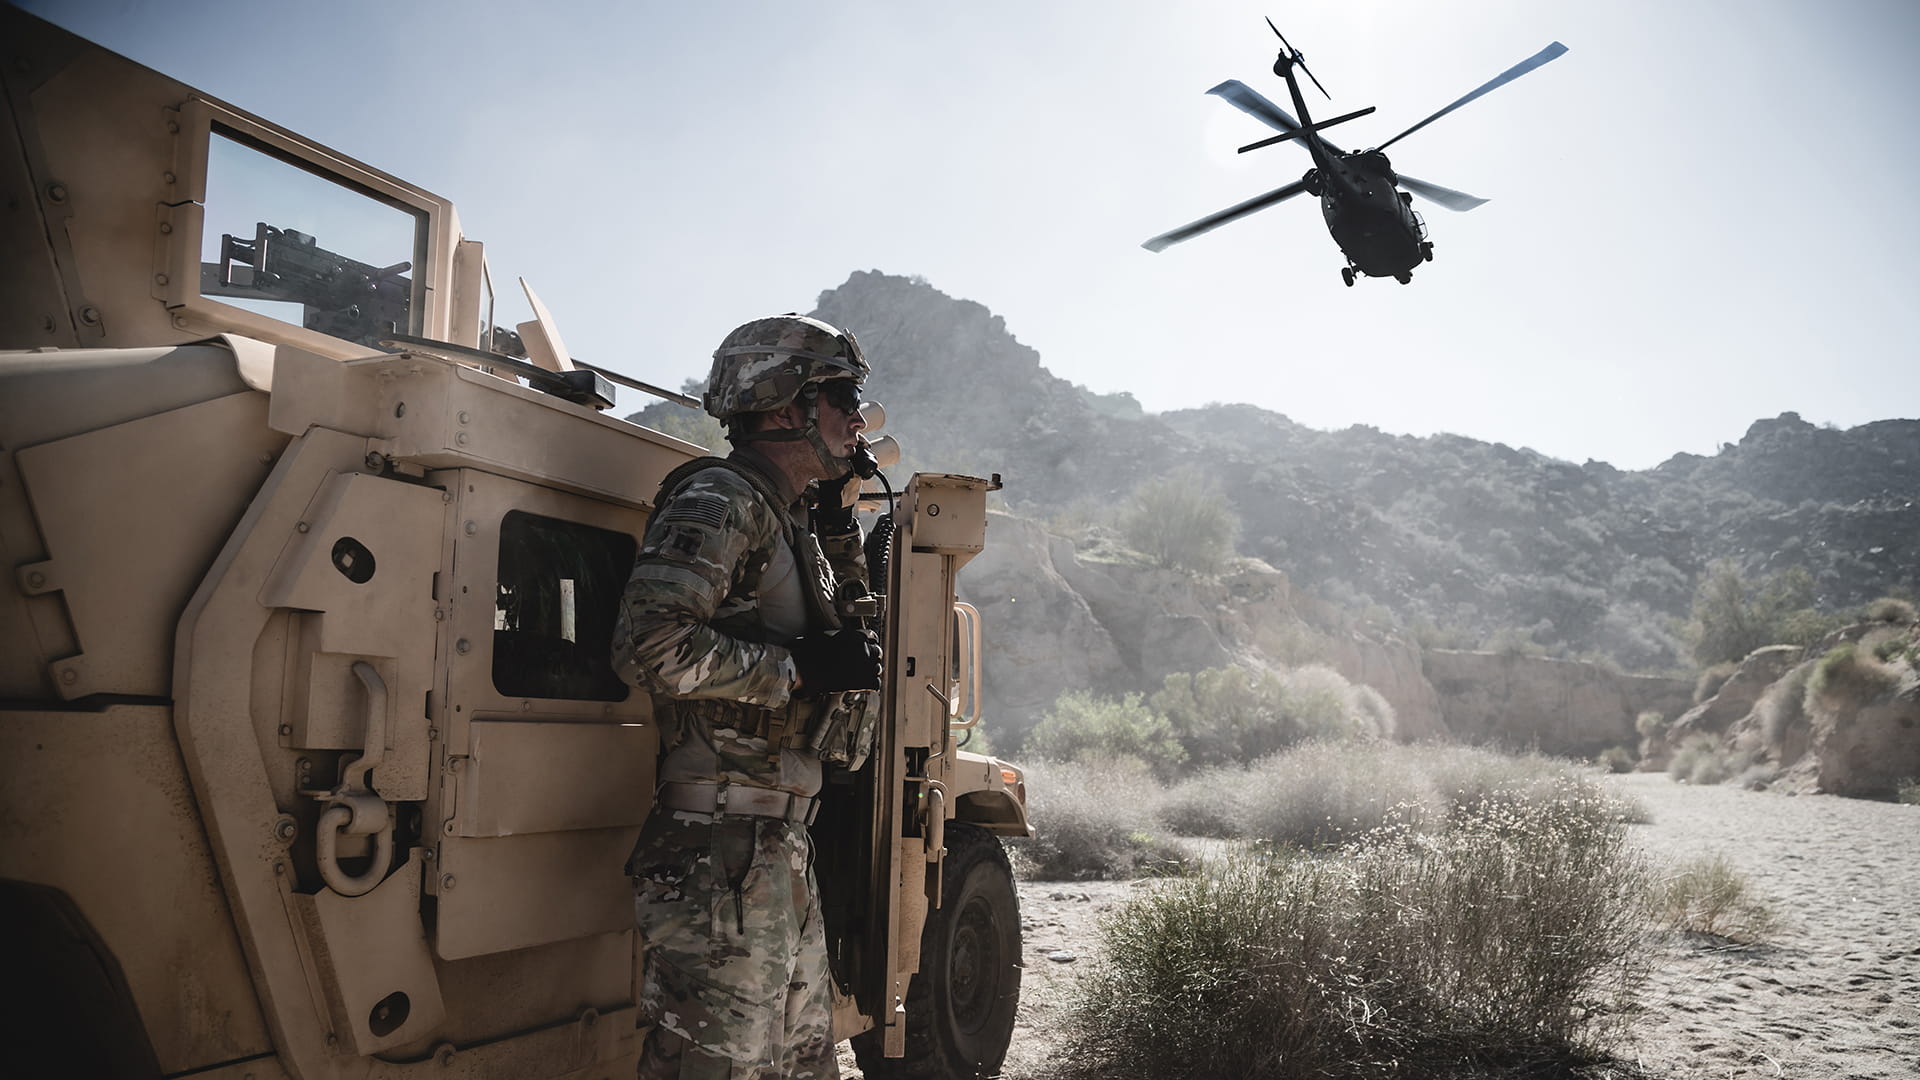 A solider stands next to a military Humvee. A helicopter flies overhead.